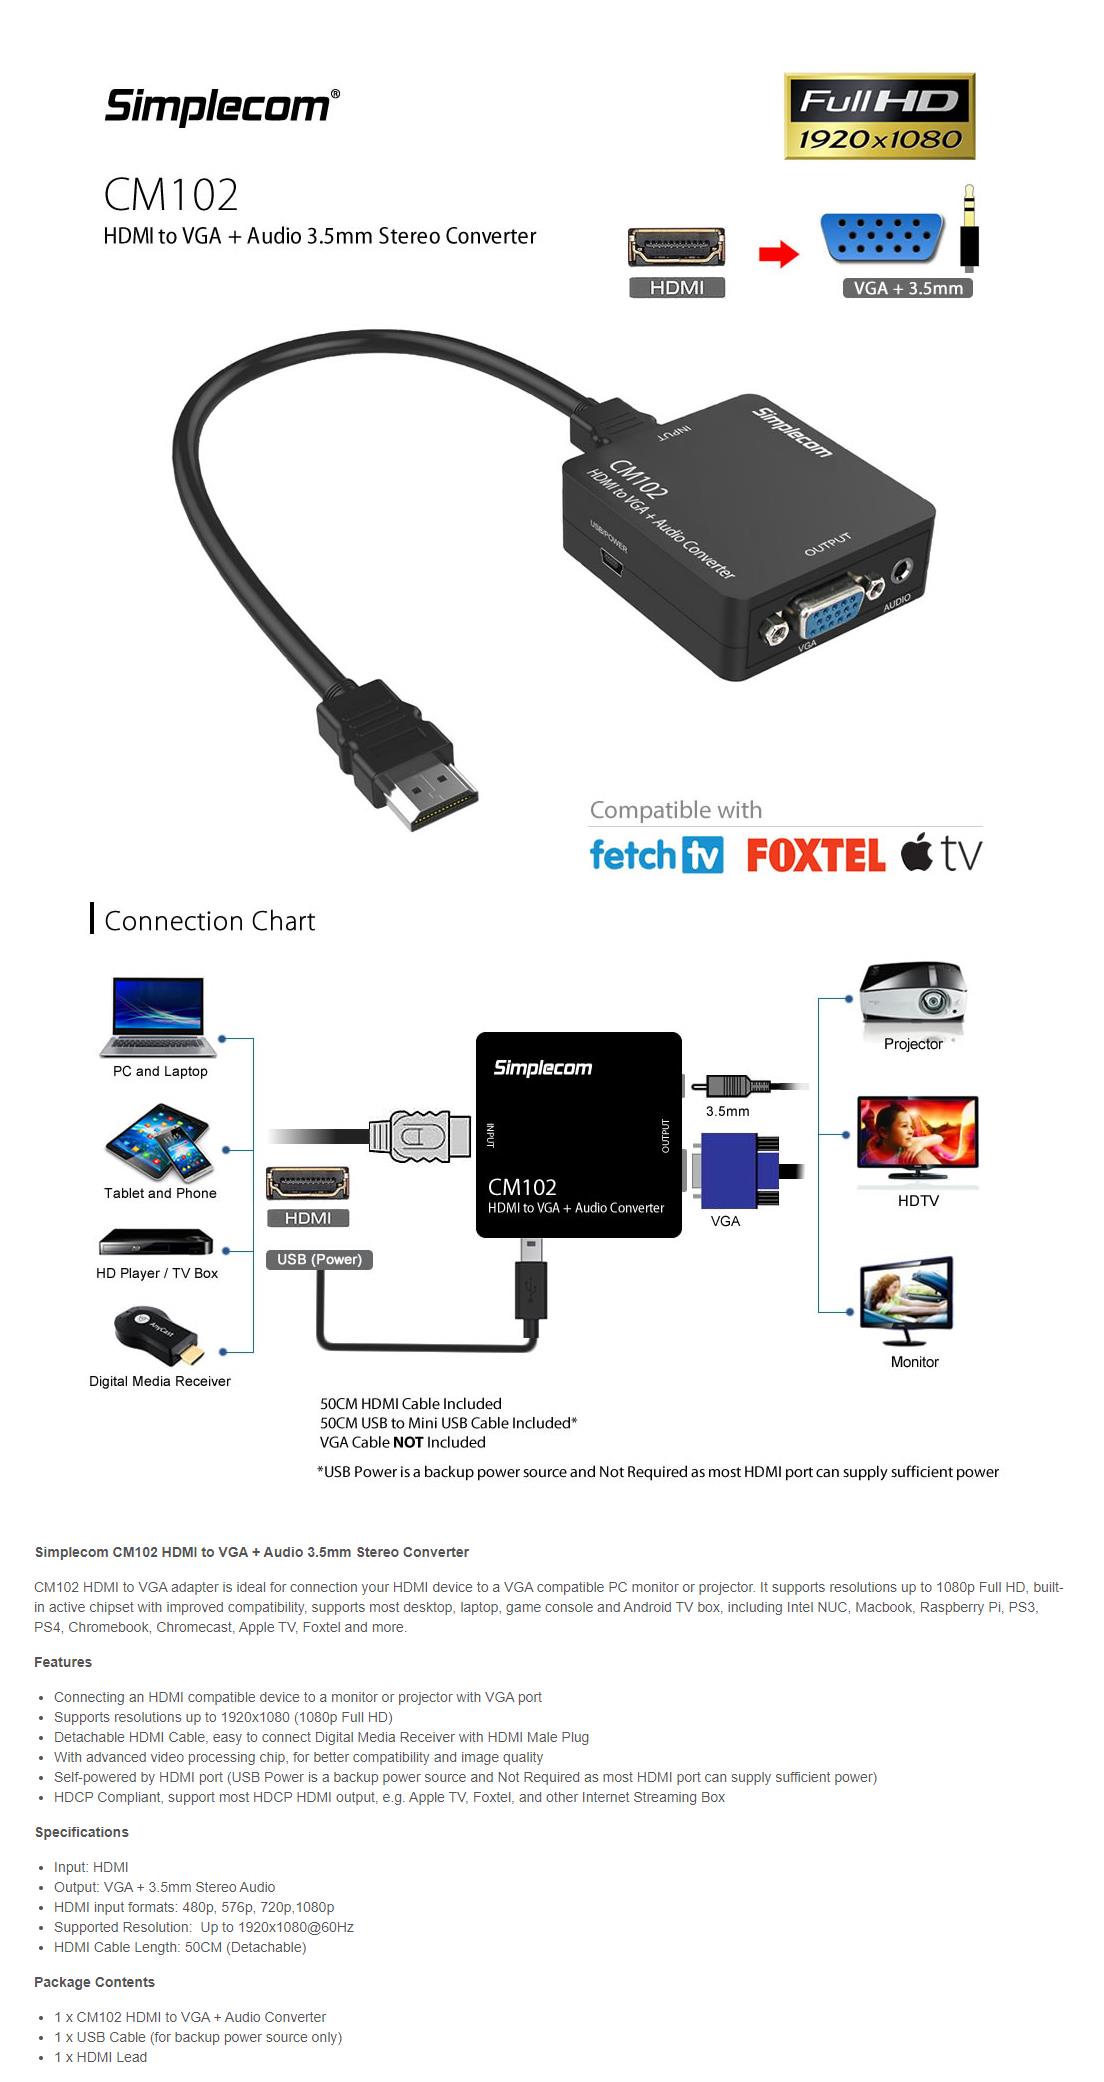 A large marketing image providing additional information about the product Simplecom CM102 HDMI to VGA + 3.5mm Stereo Converter - Additional alt info not provided